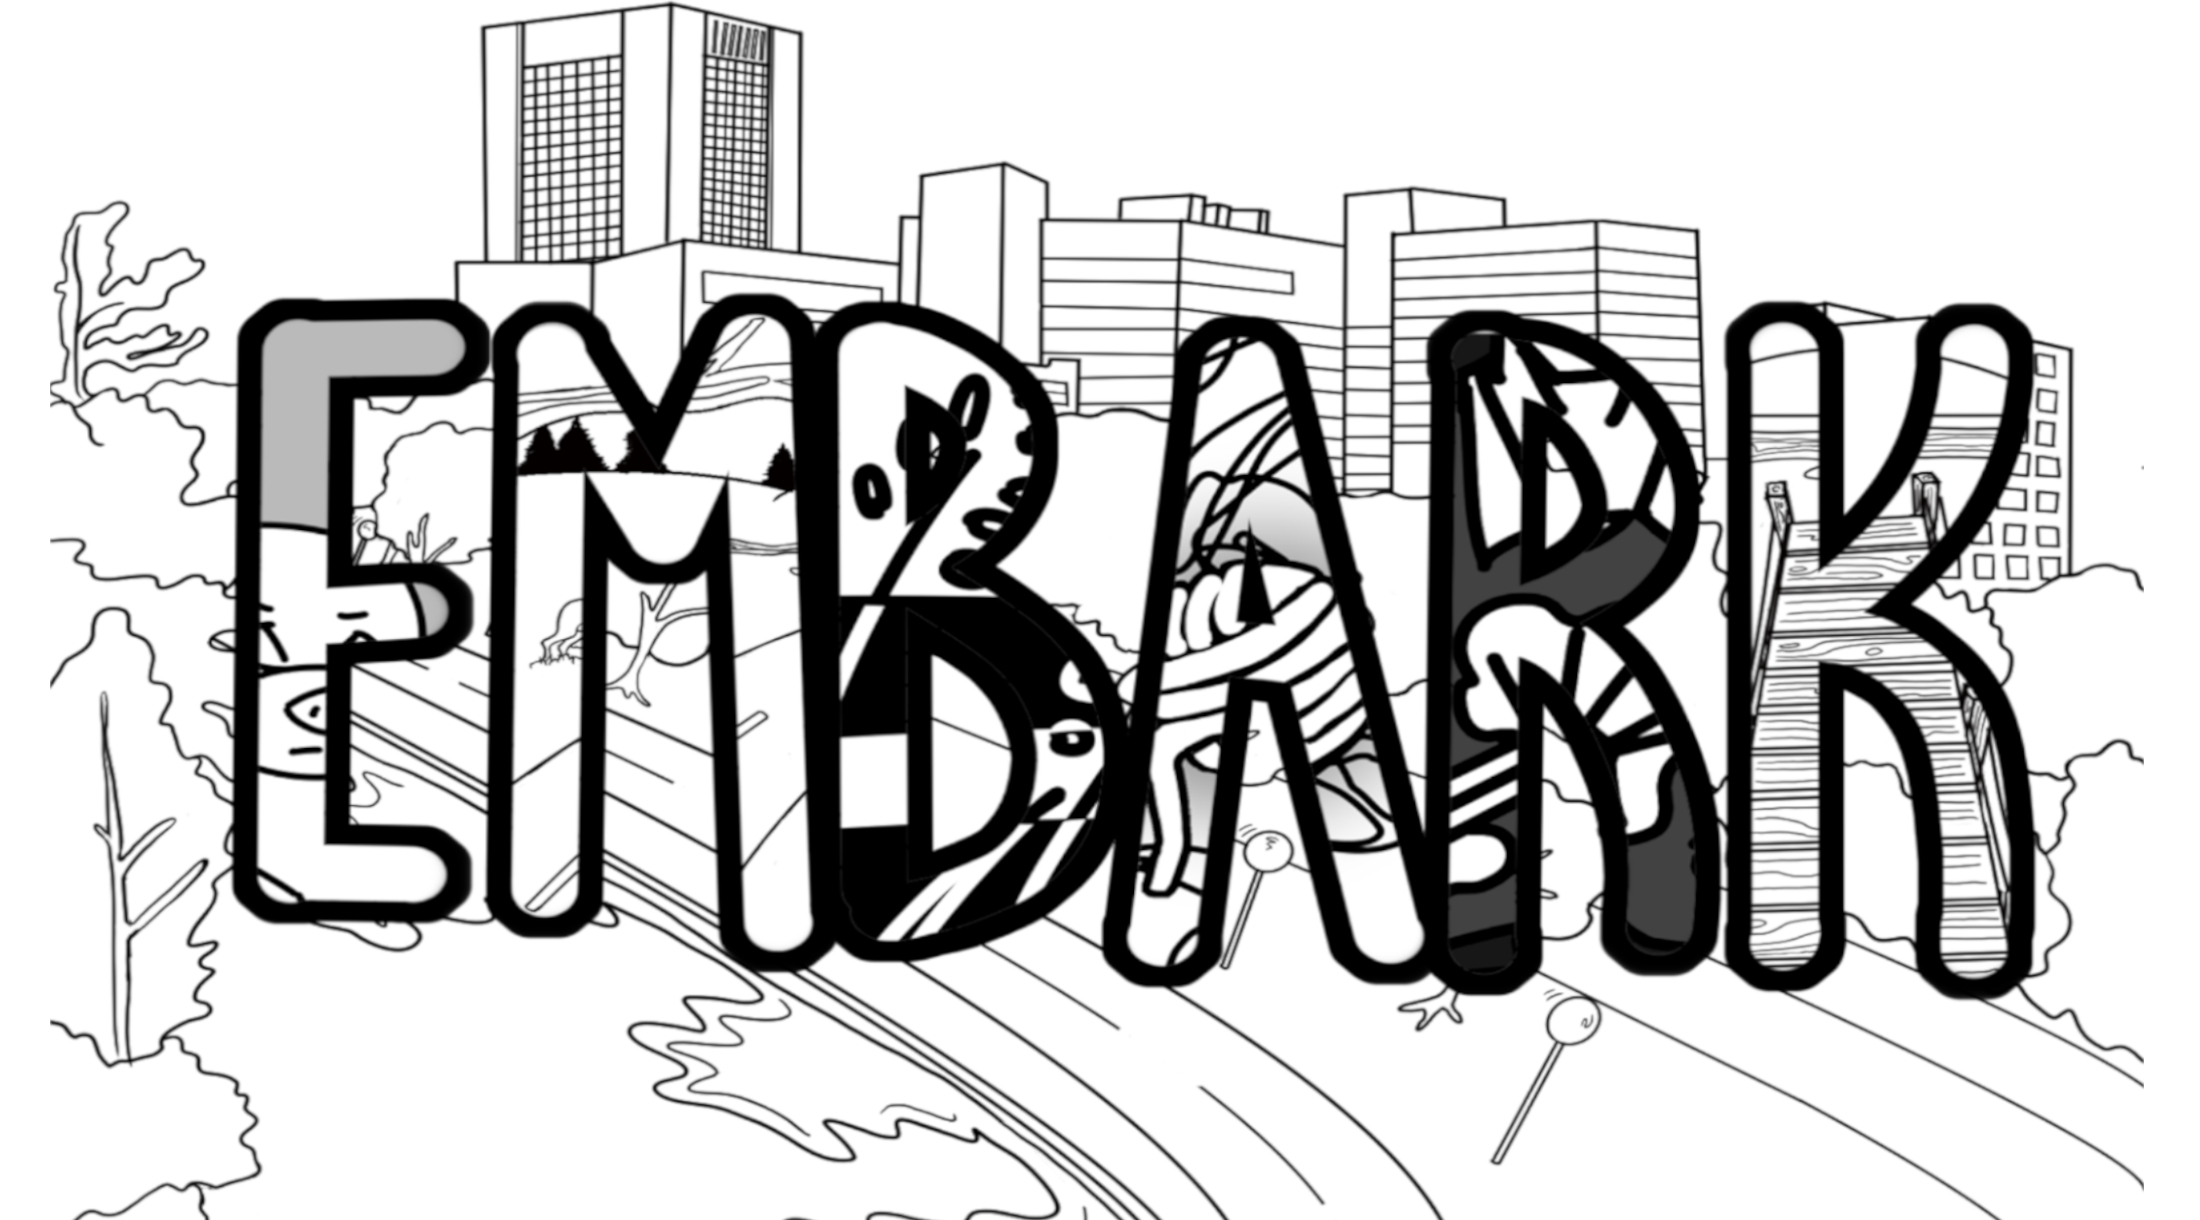 Embark cover illustration in black and white line drawing style. In the background we see Carleton University campus, looking at the Library and Dunton Tower, with the water in the bottom left corner. In the foreground is EMBARK in all-caps bubble letters. Inside the letters are select clippings of illustrations featured alongside the issue 1 pieces.